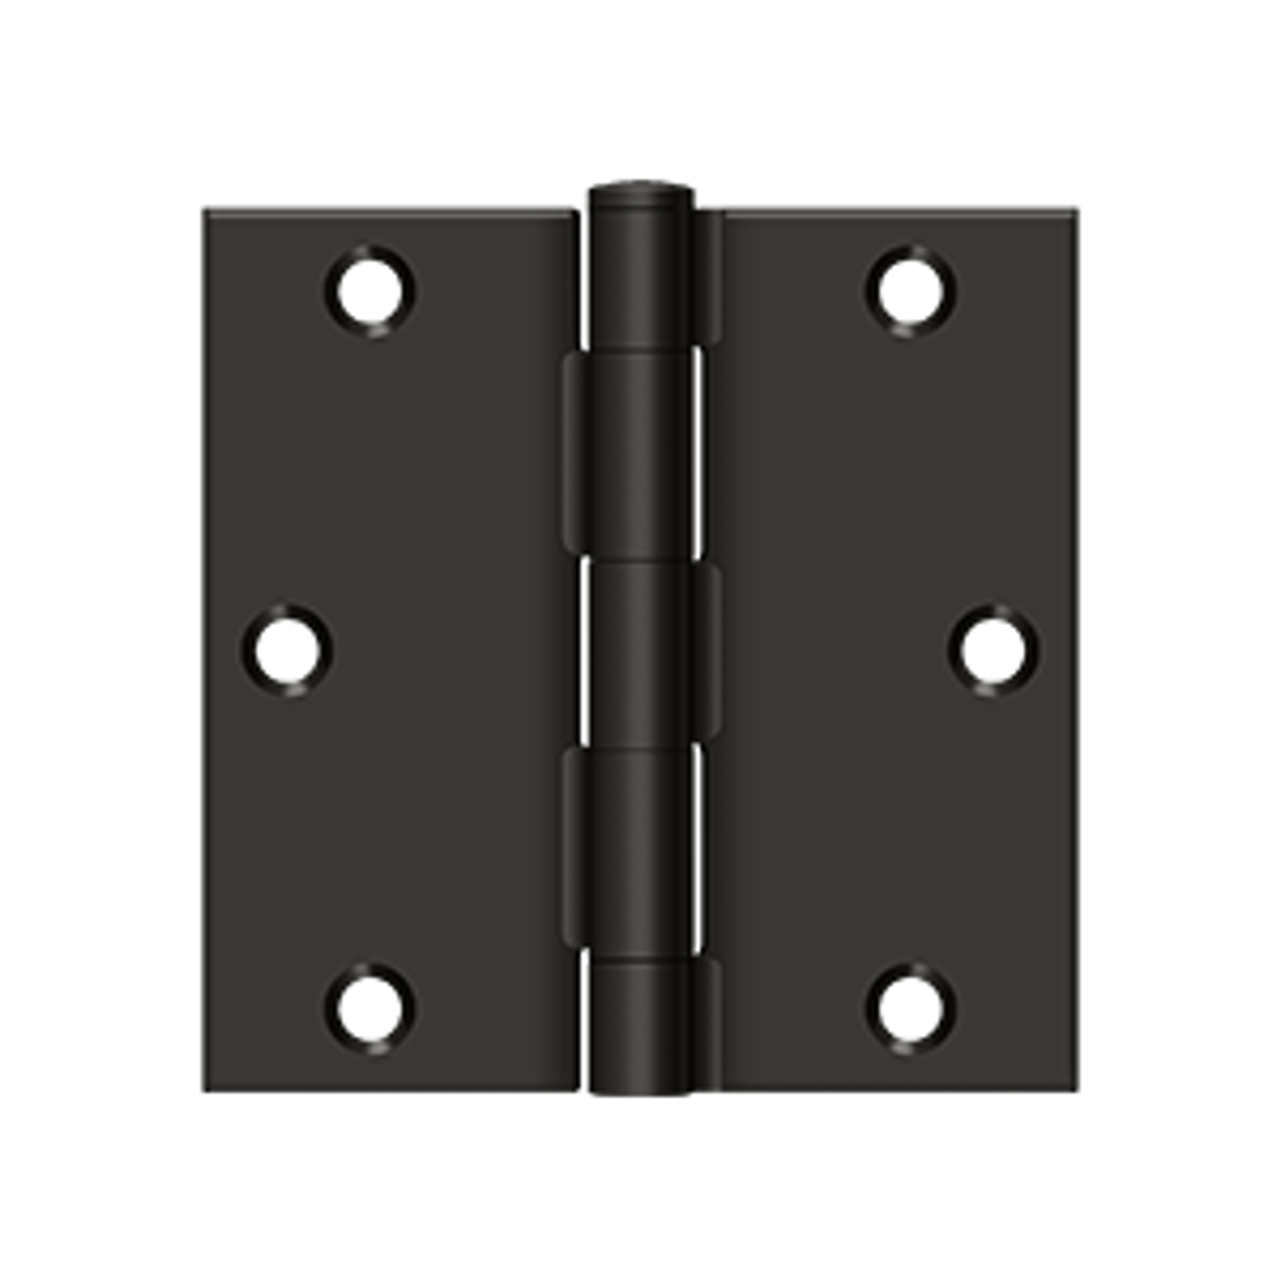 Deltana S35R 3-1/2" X 3-1/2" SQUARE HINGE STEEL MATERIAL